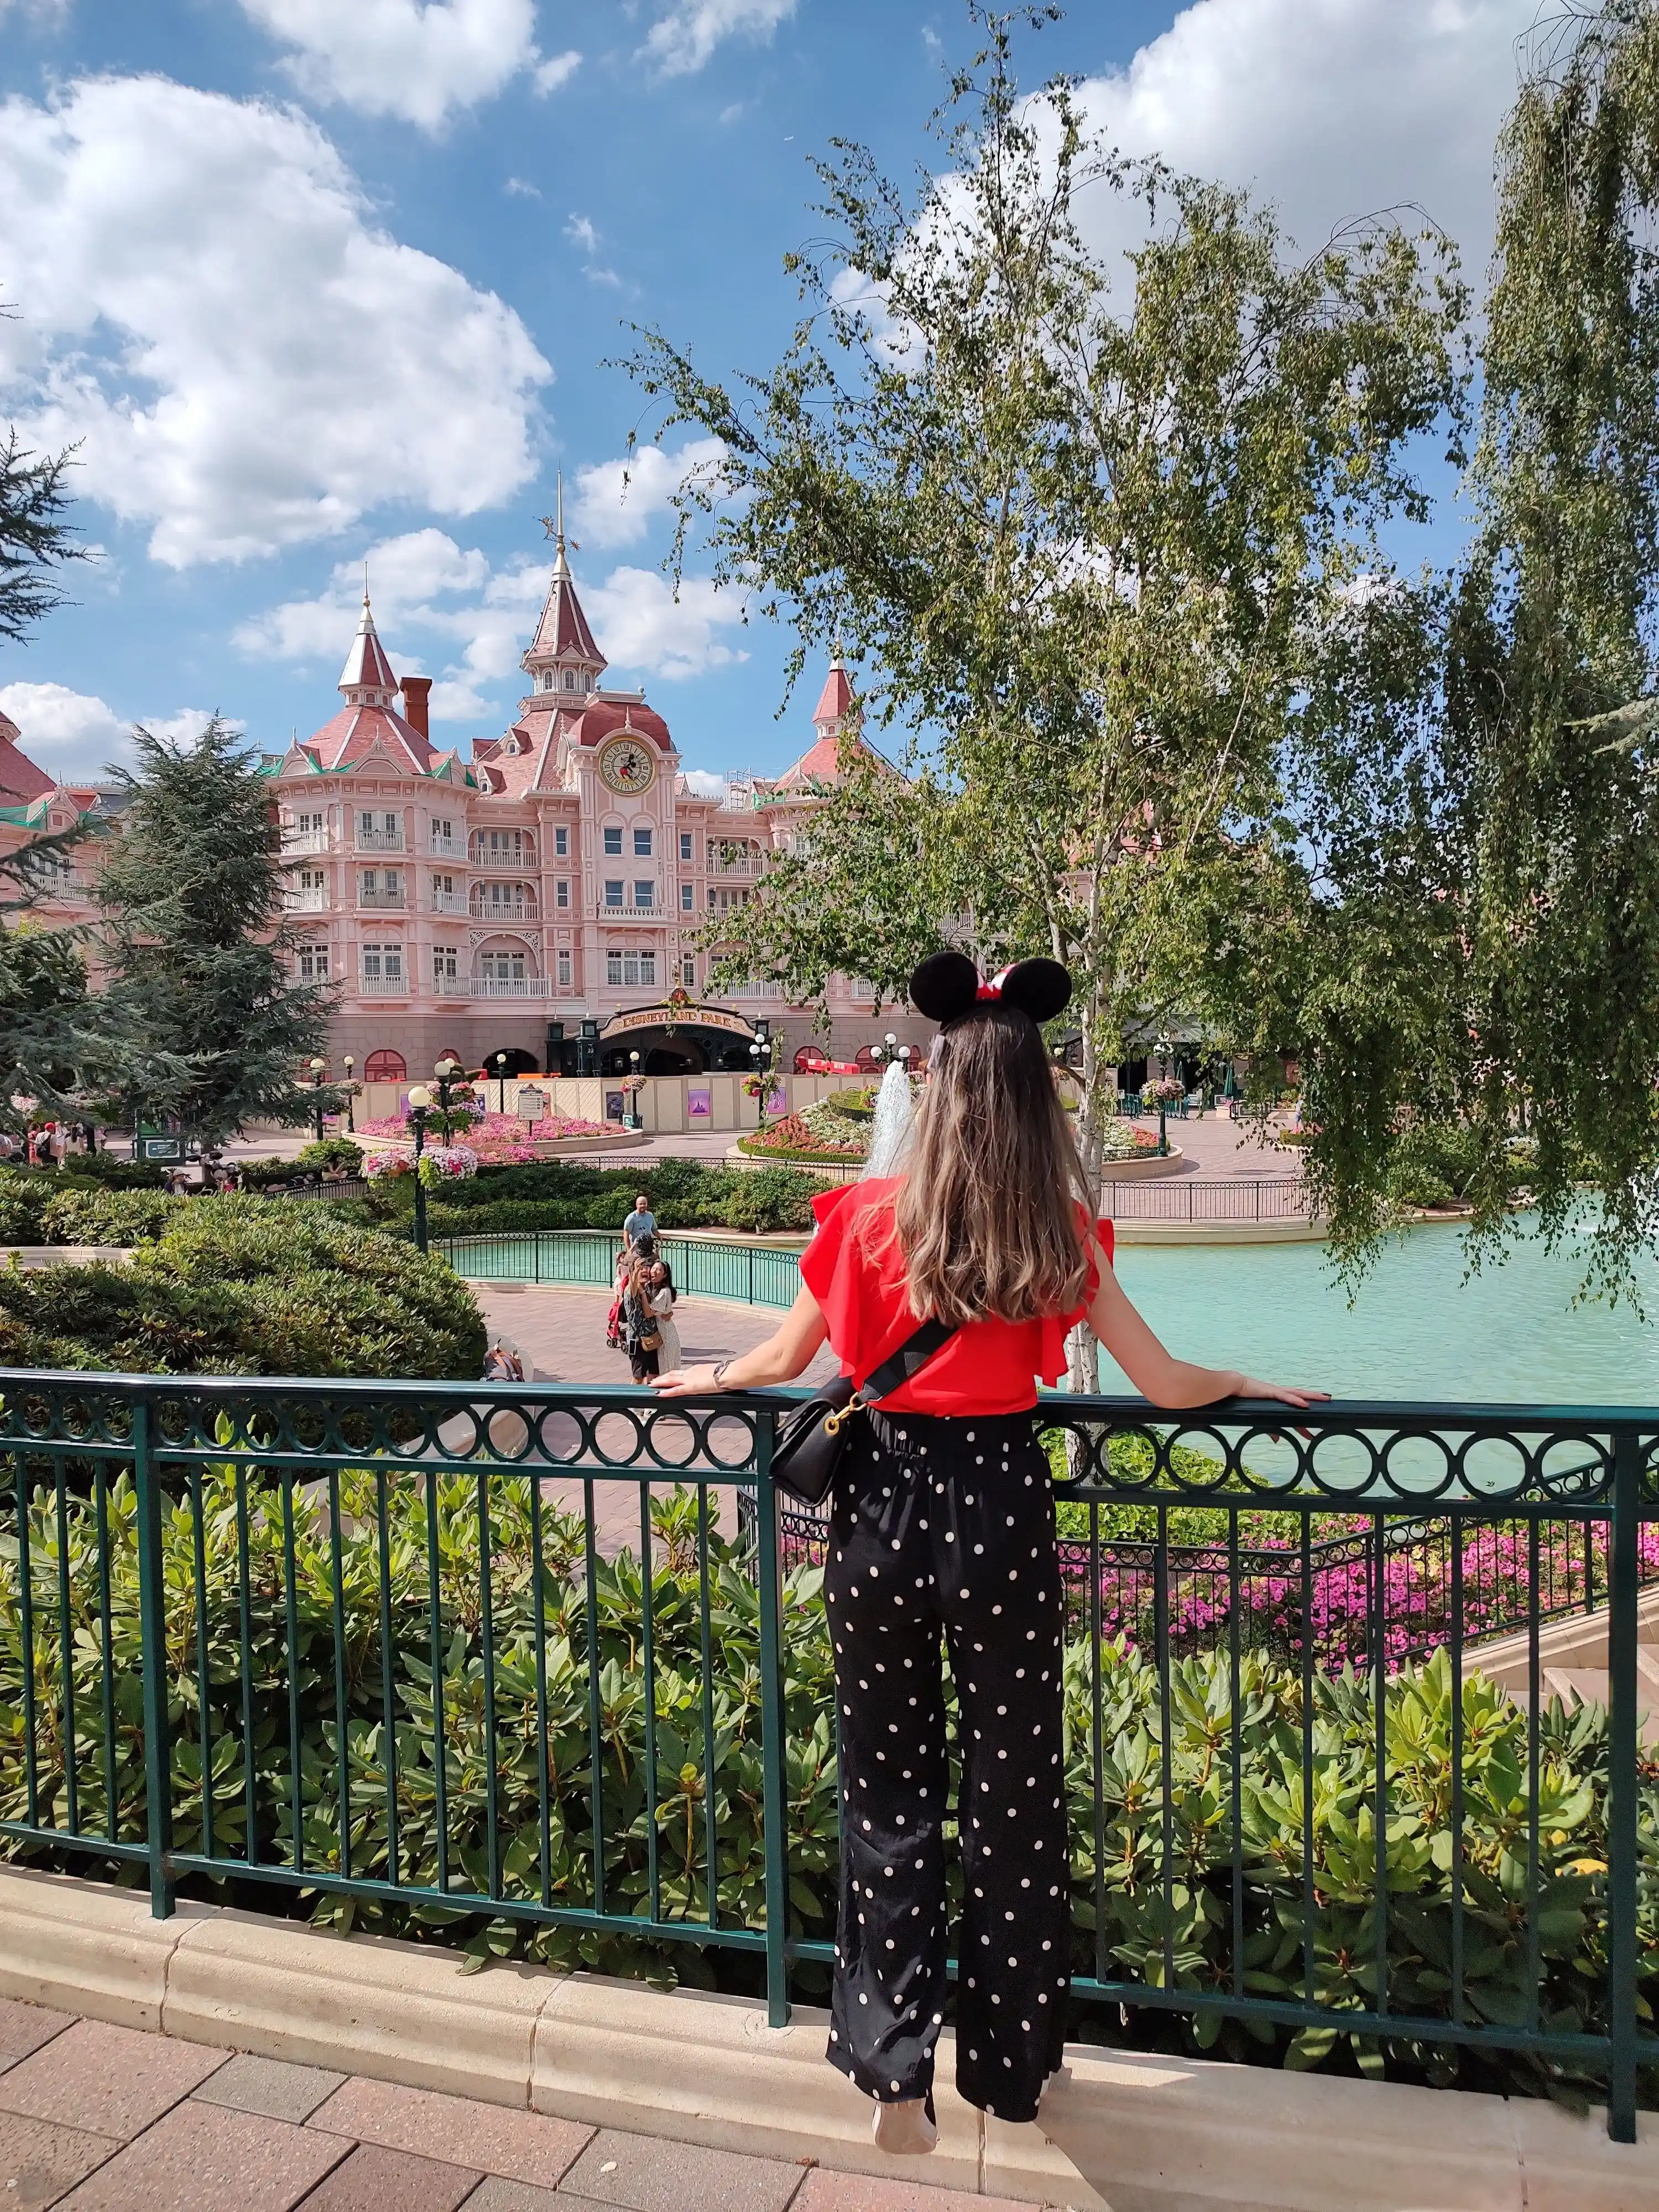 A girl standing and watching the Disneyland castle